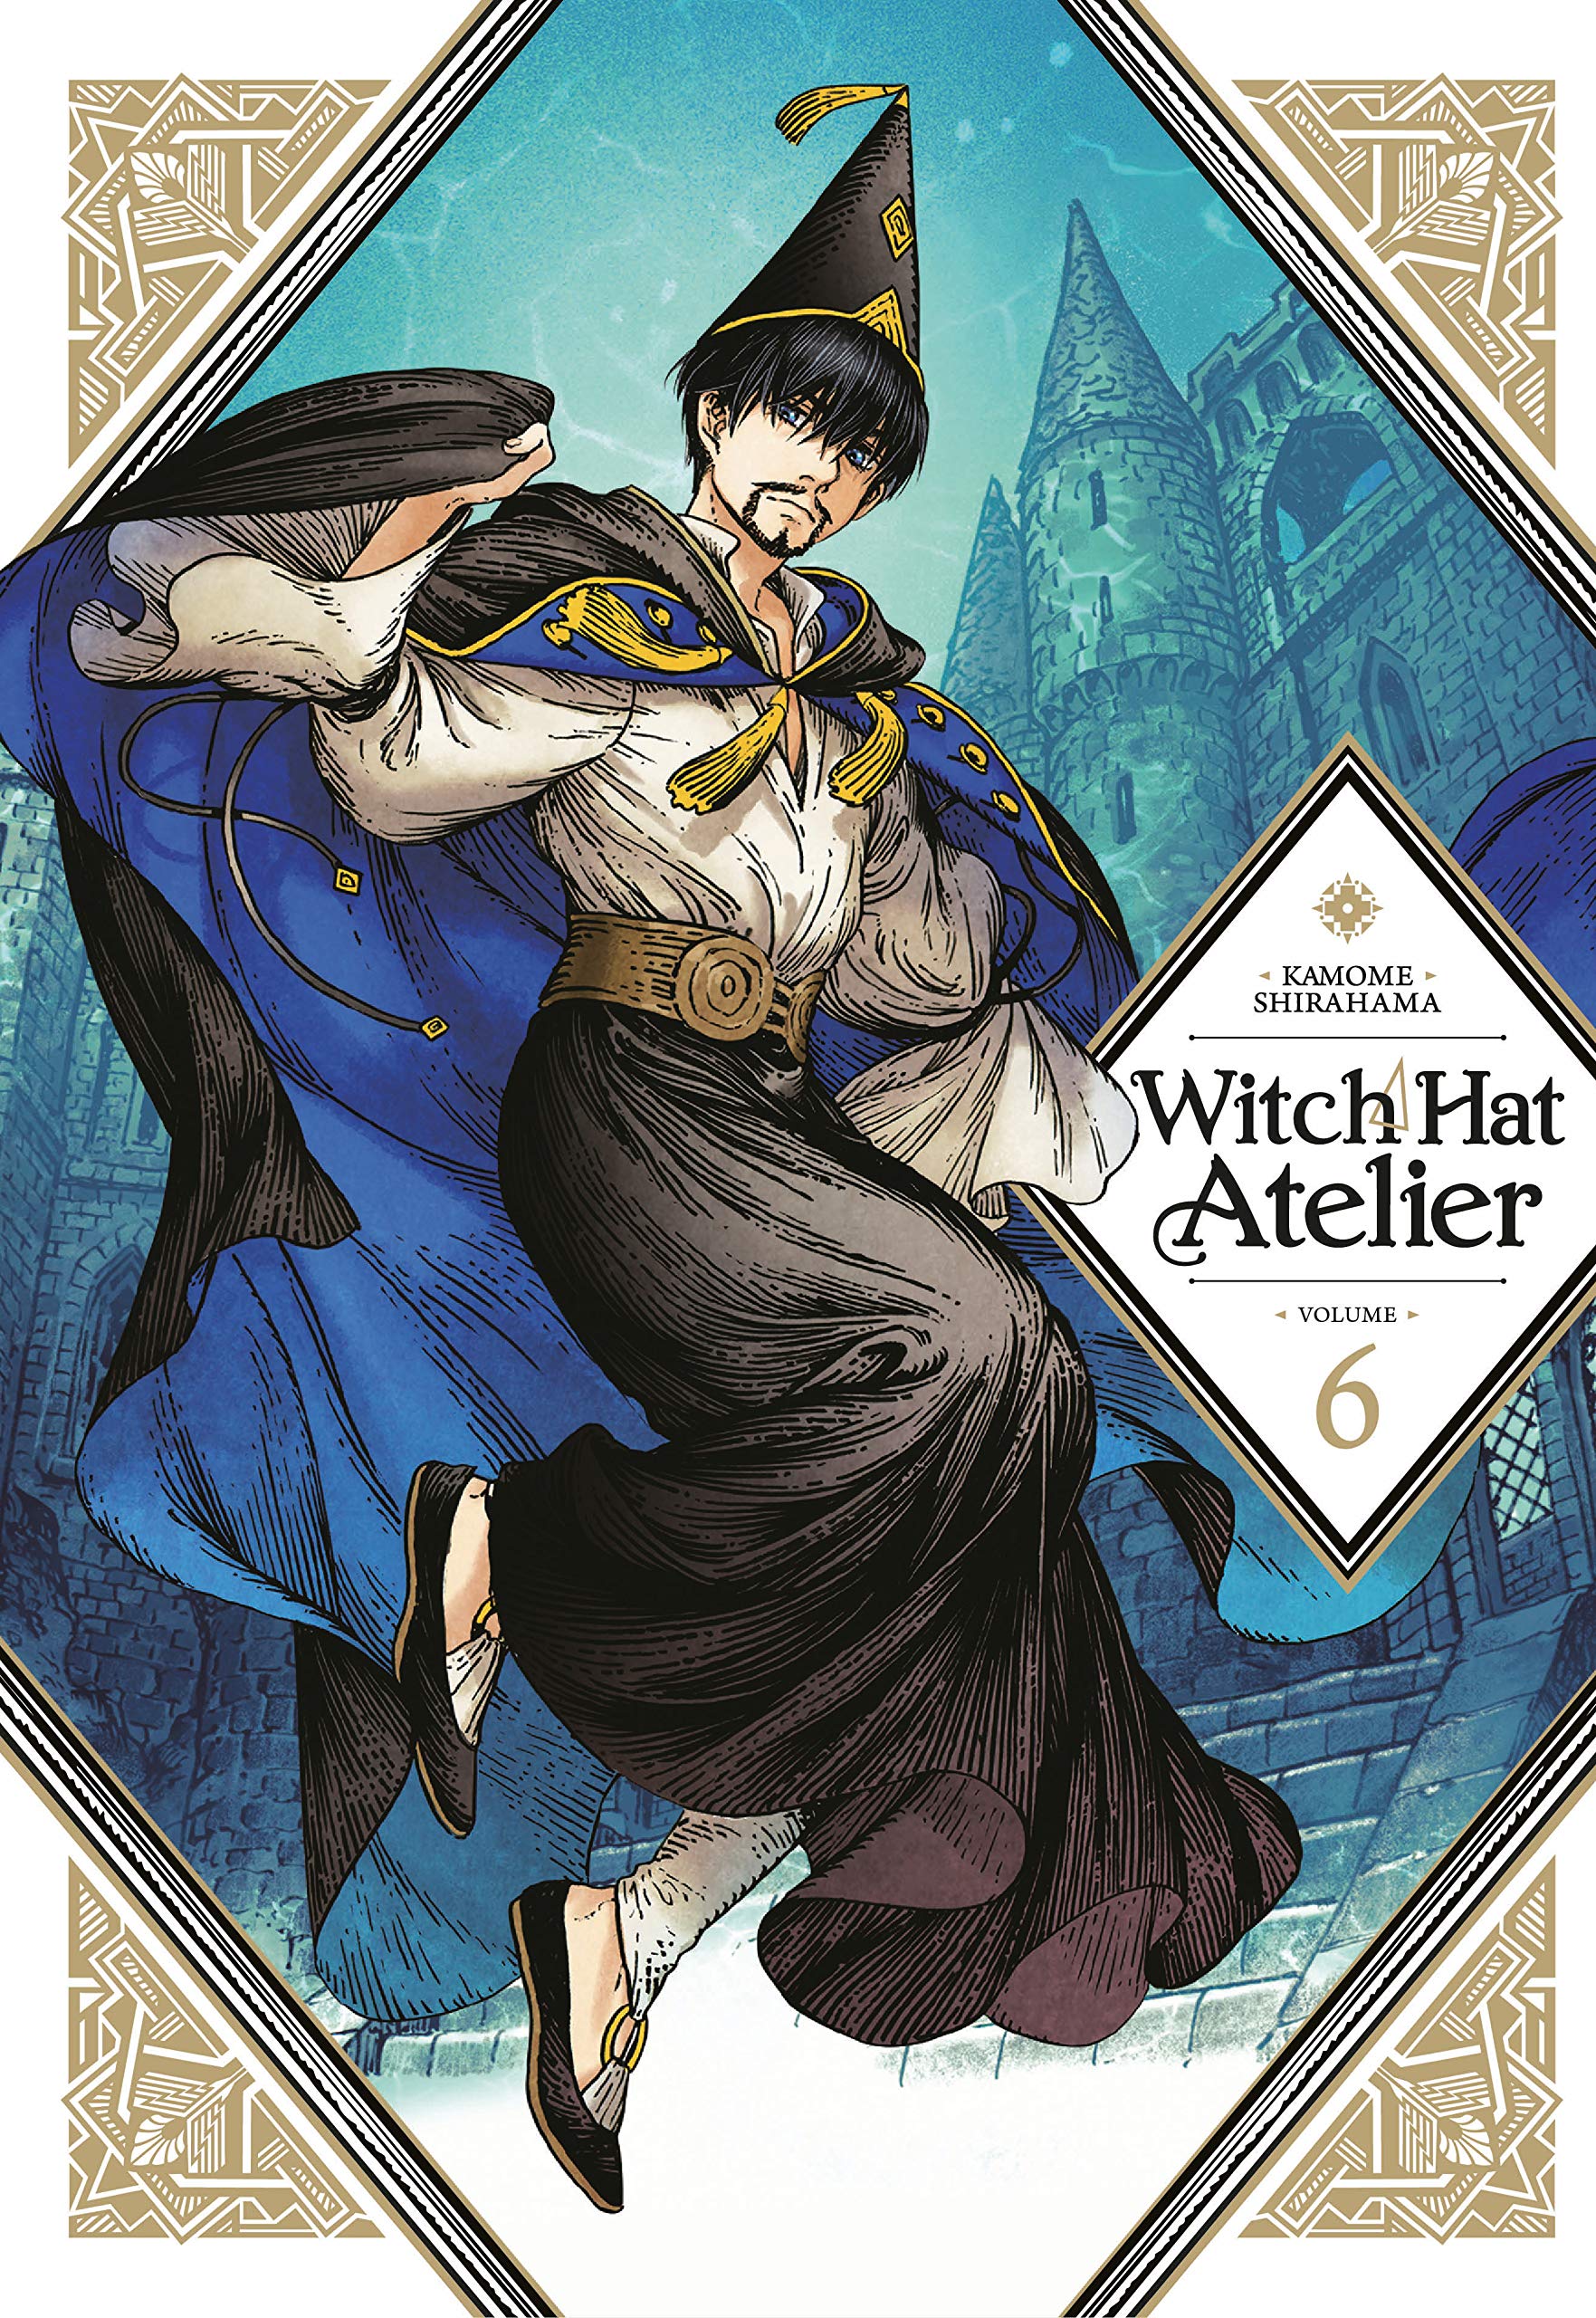 【Excellent】 Kamome Shirahama Art Work Book Witch Hat Atelier of Witch Hat